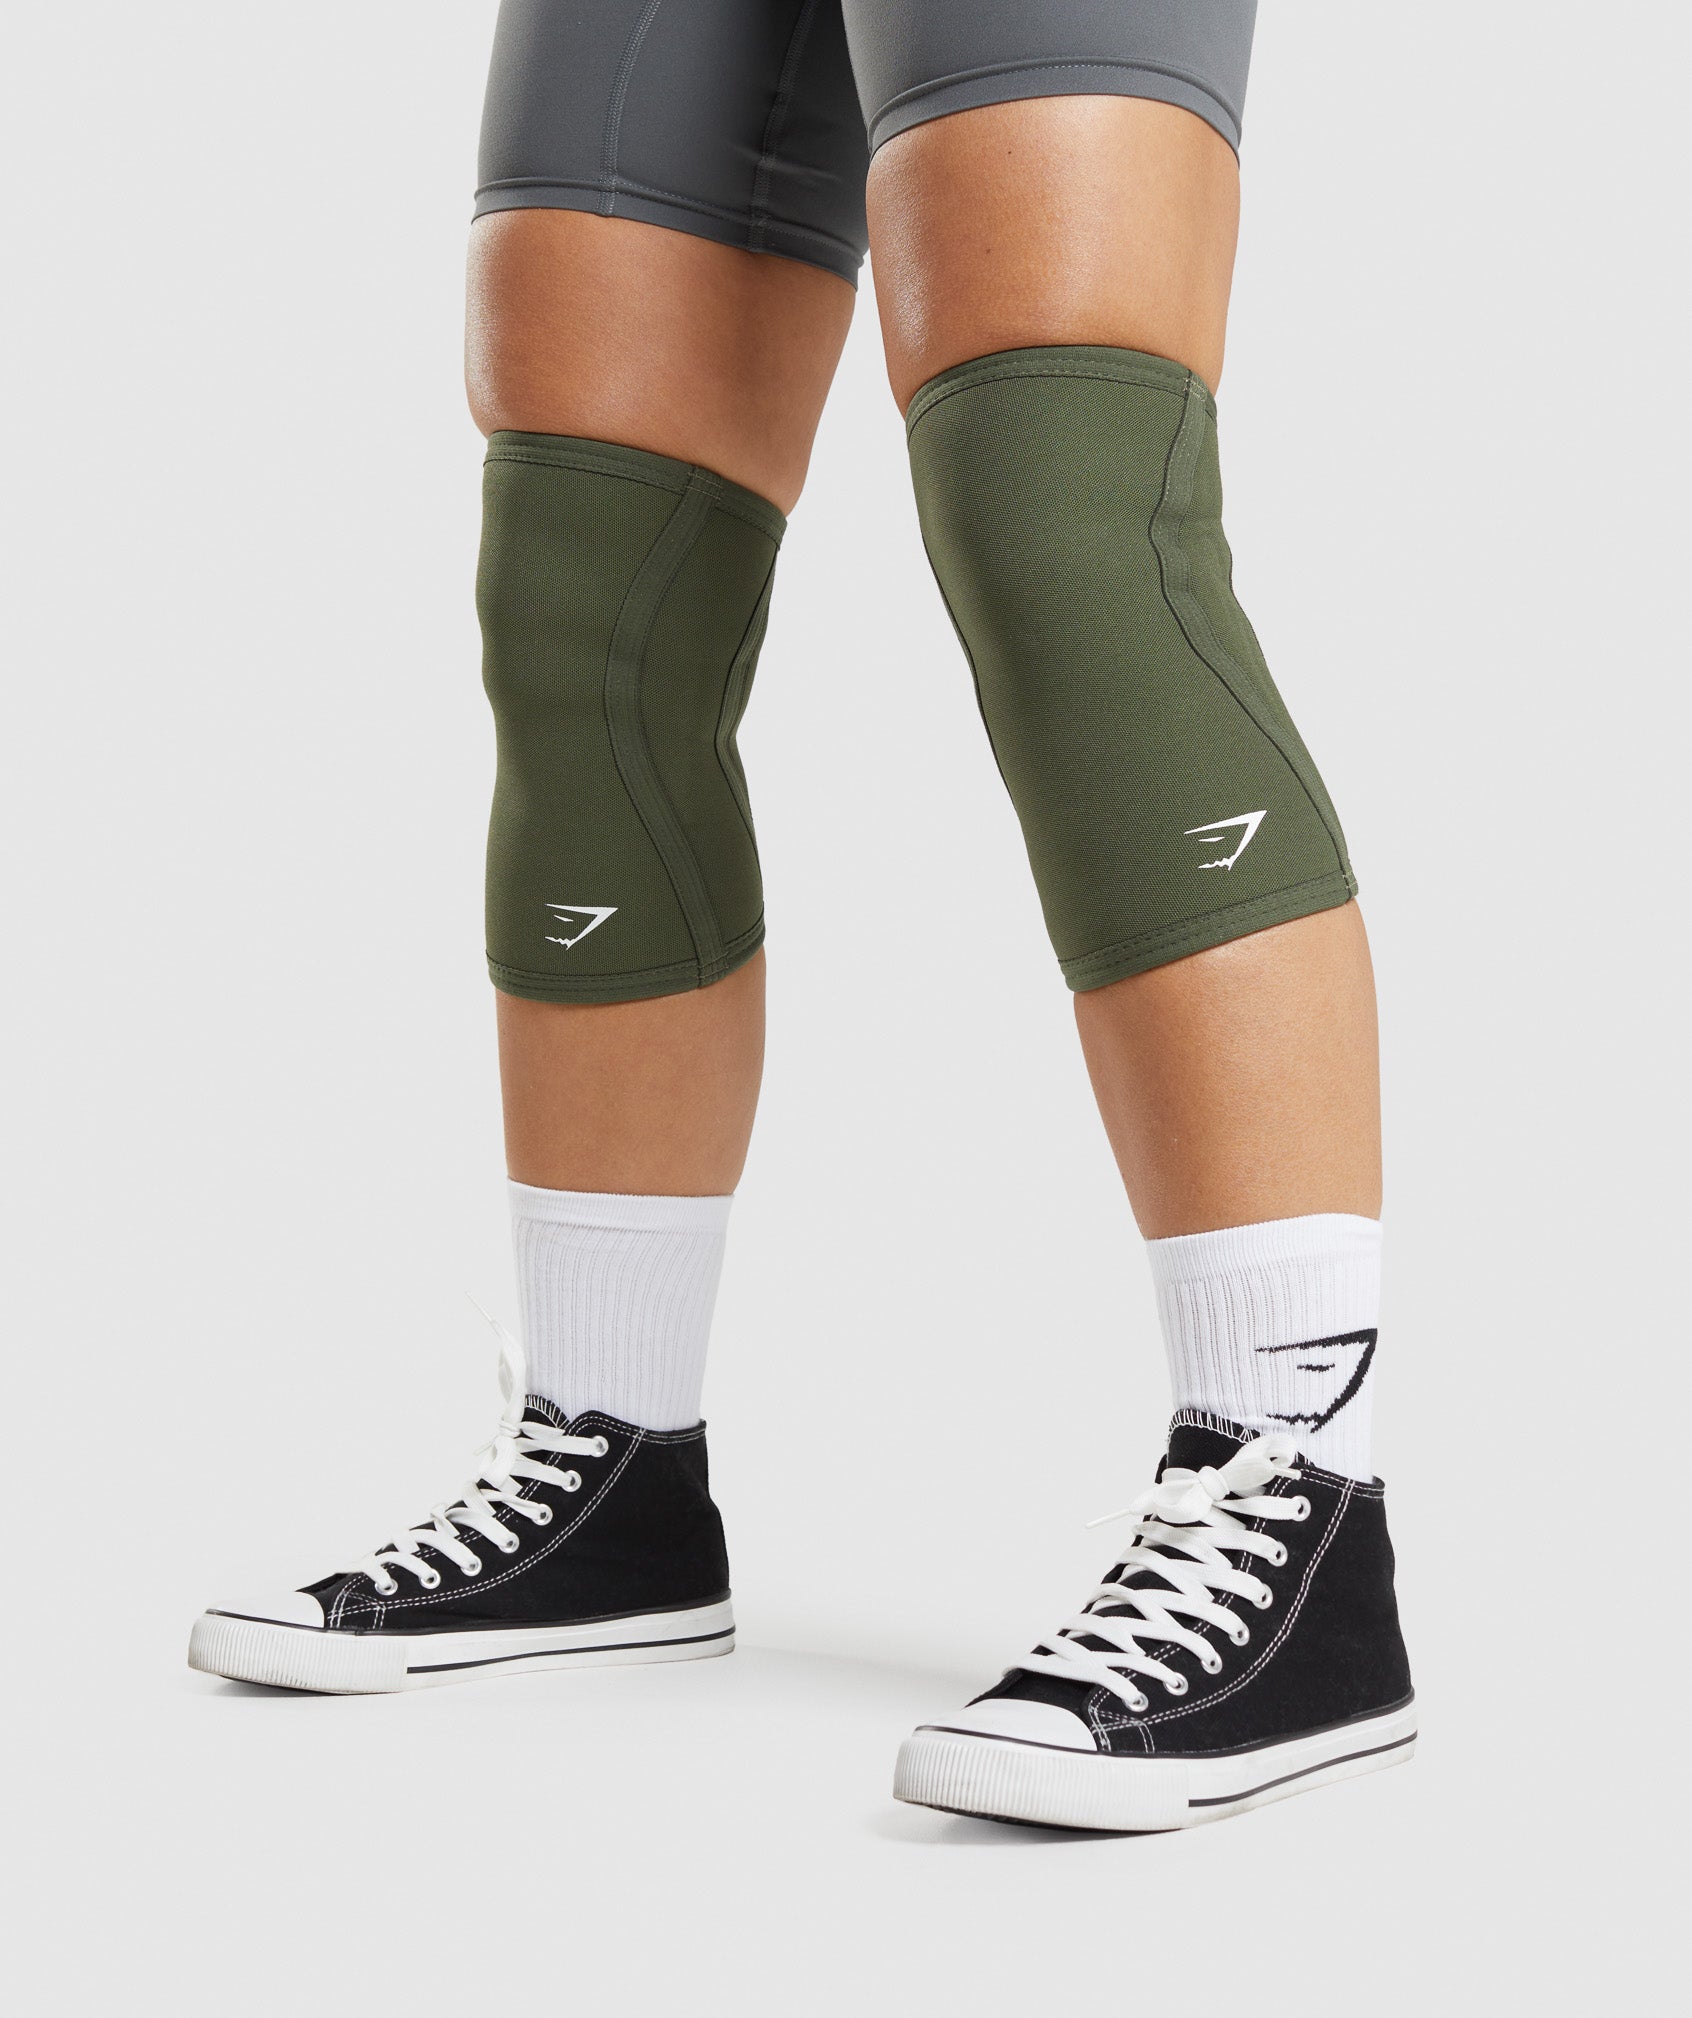 Knee Sleeves 5mm in Olive Green - view 3